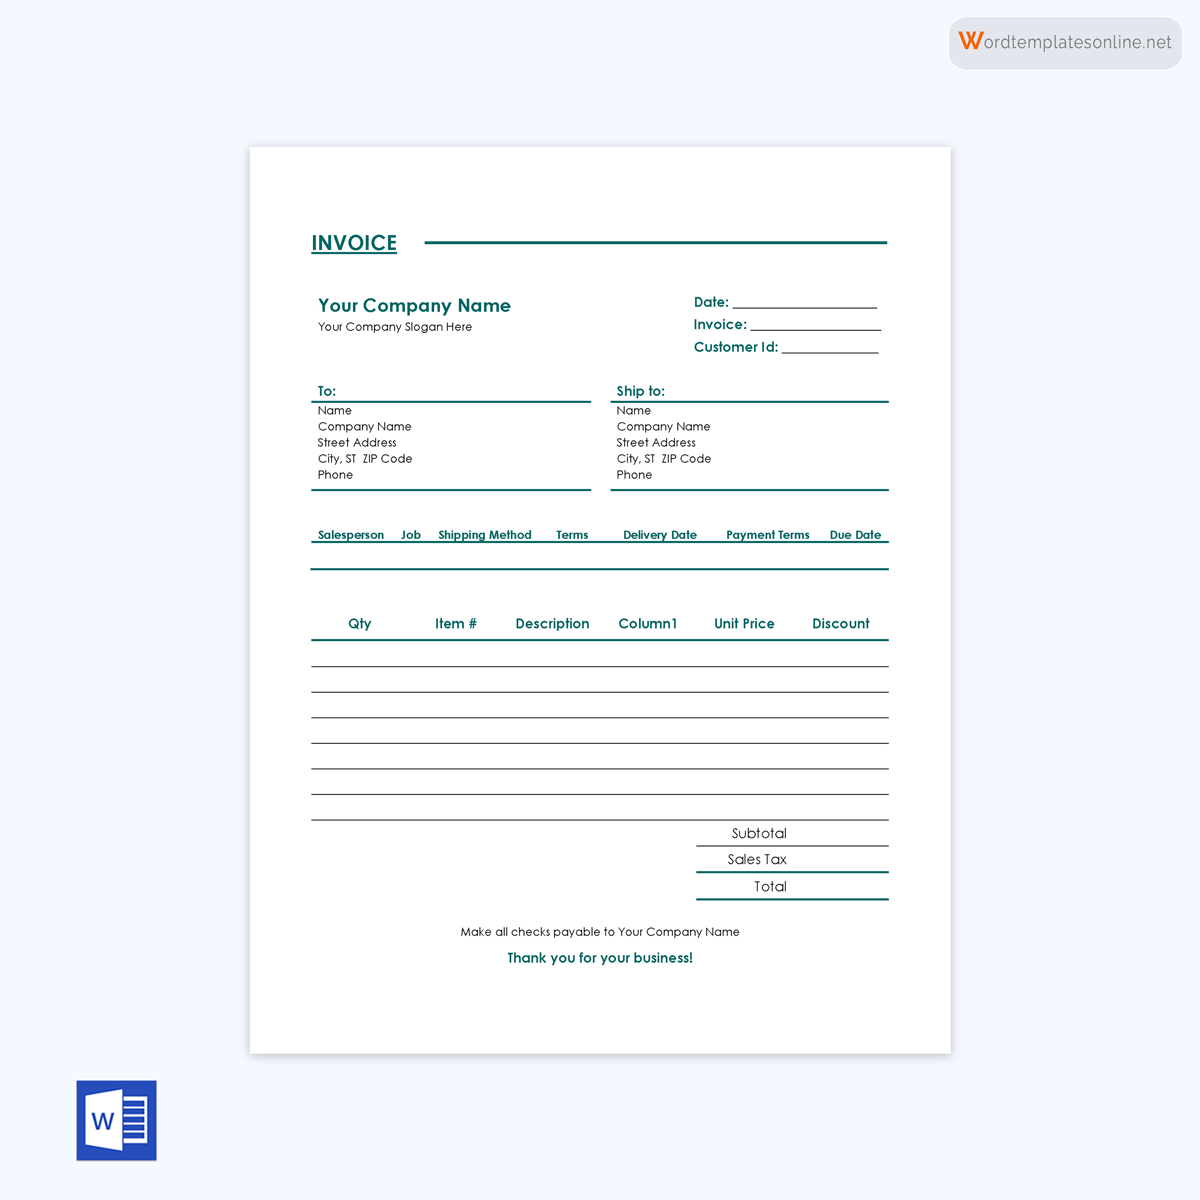 Free editable blank invoice form - Word Format